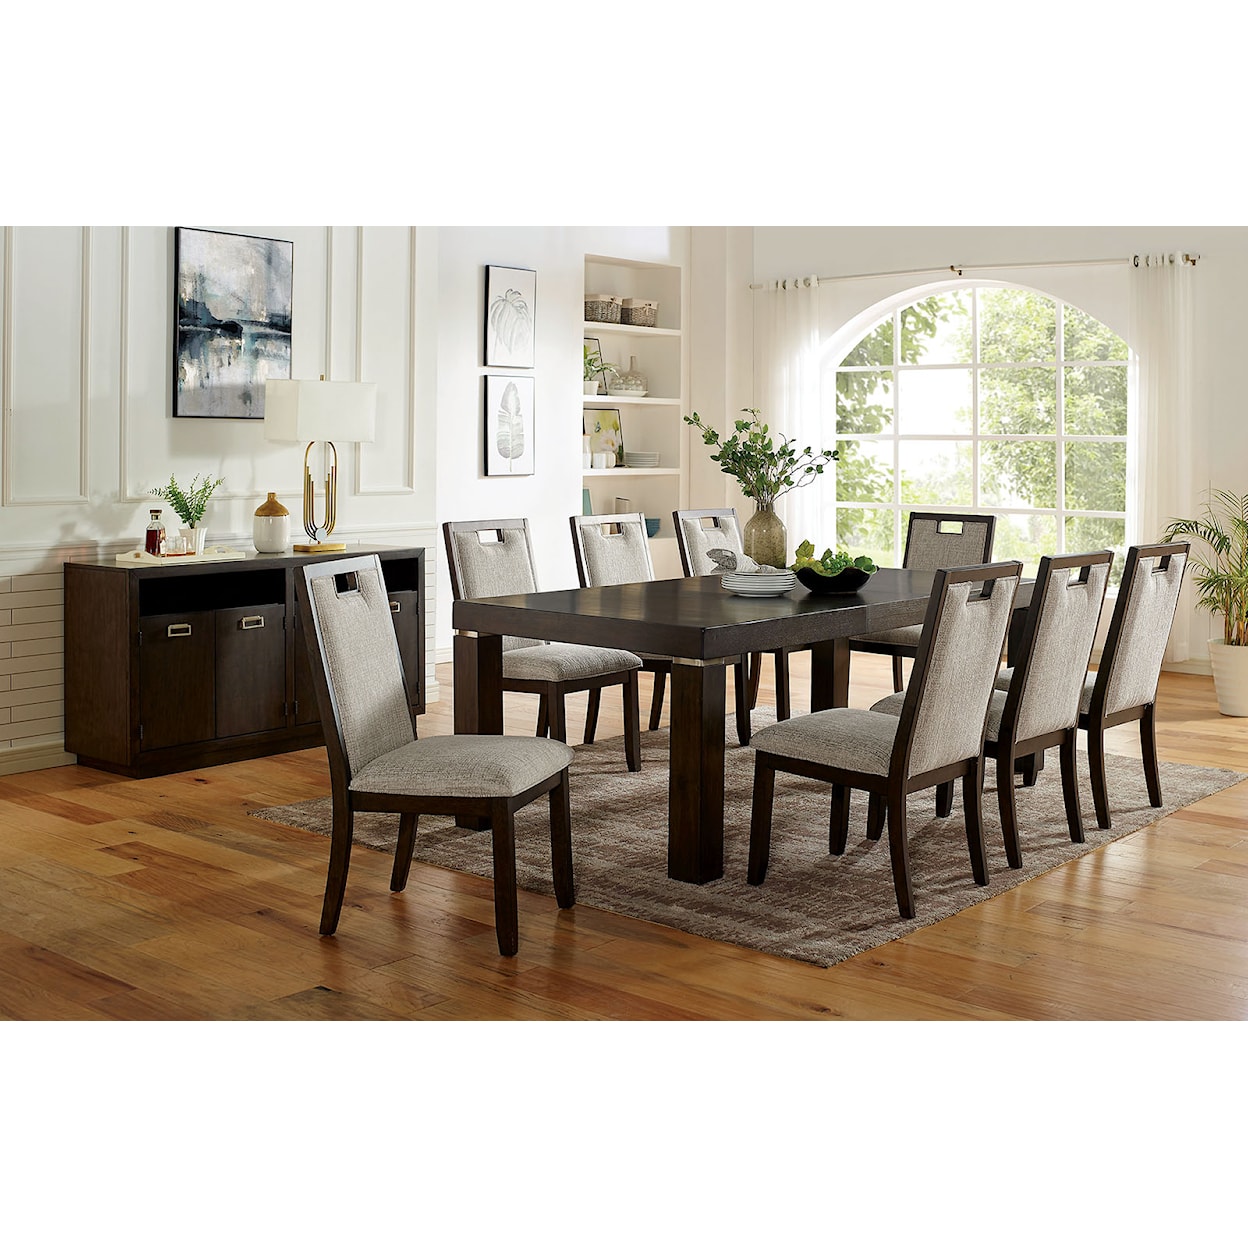 Furniture of America Caterina 9 Pc. Dining Table Set